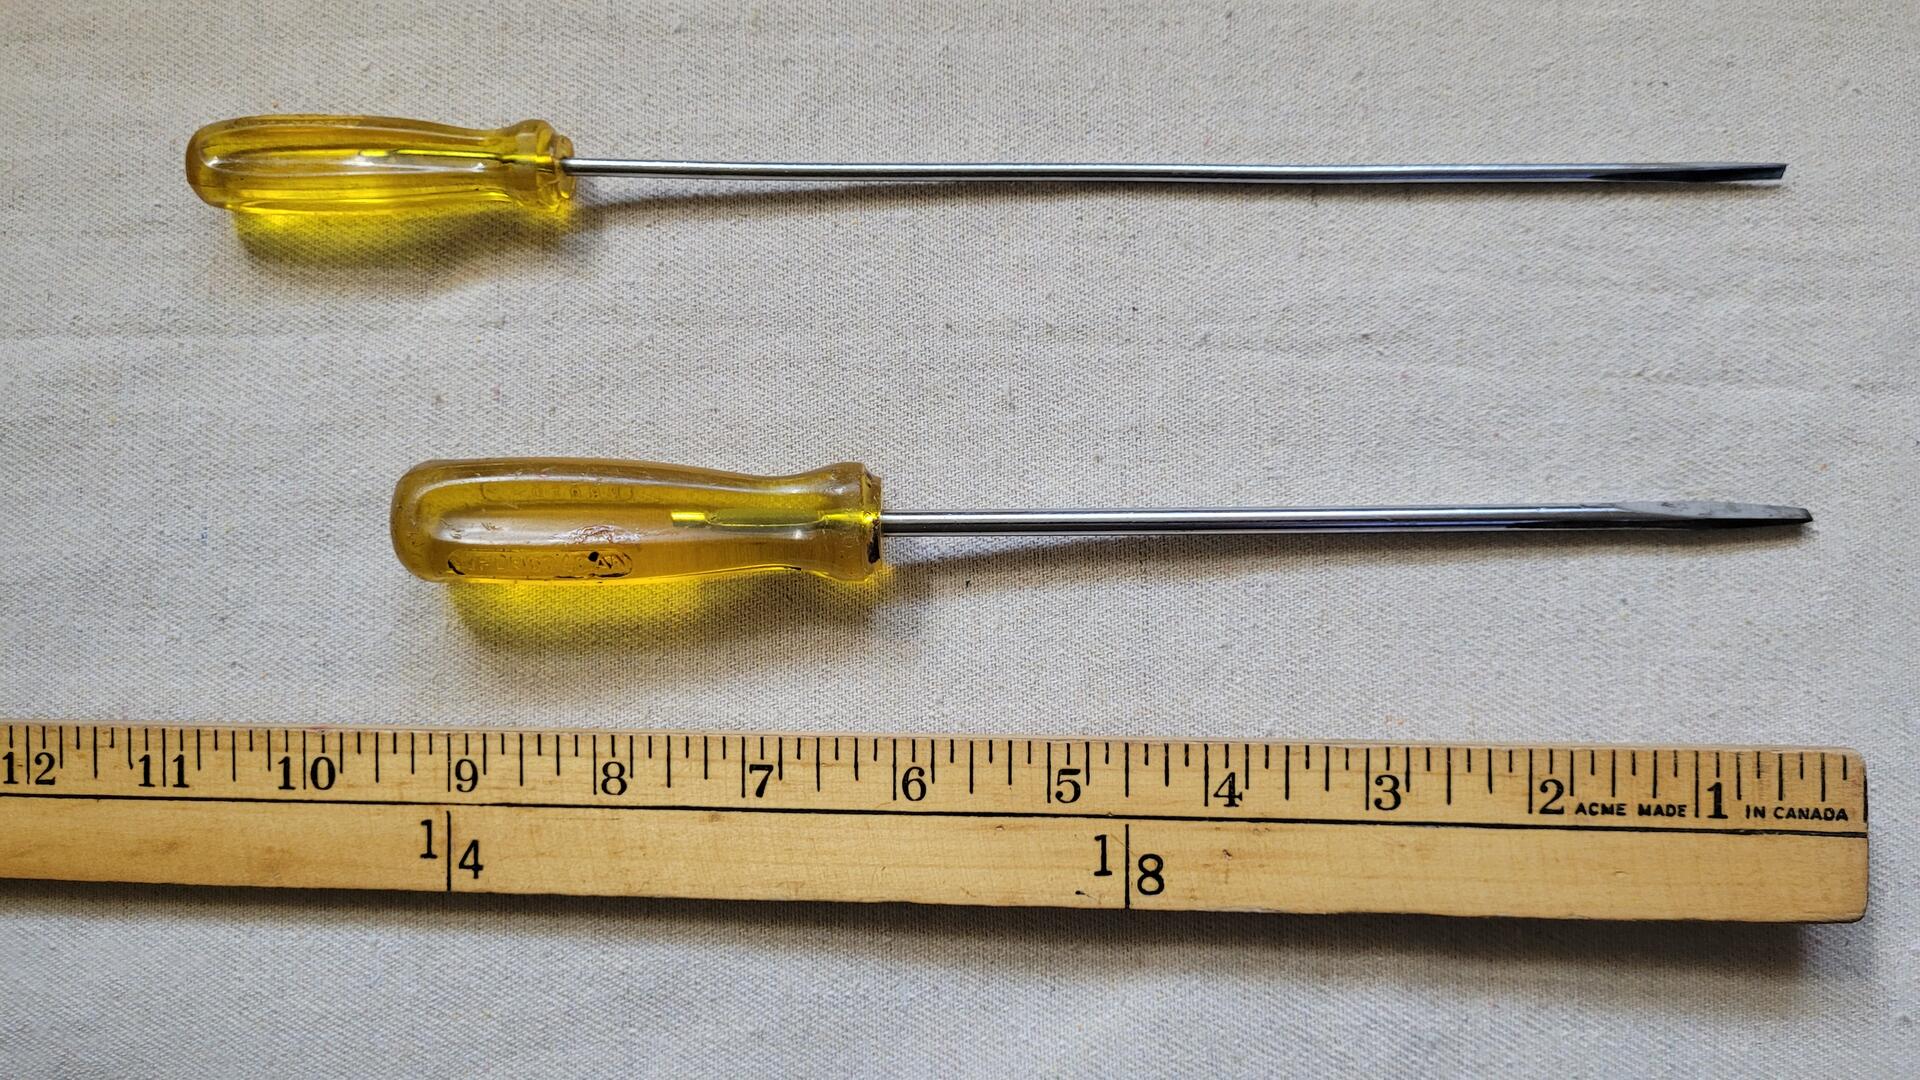 Rare MFD9634CAN and MFD9627CAN pair of vintage long classic Proto flat head screwdrivers with yellow unbreakable handles. Antique mid century made in Canada collectible hand tools